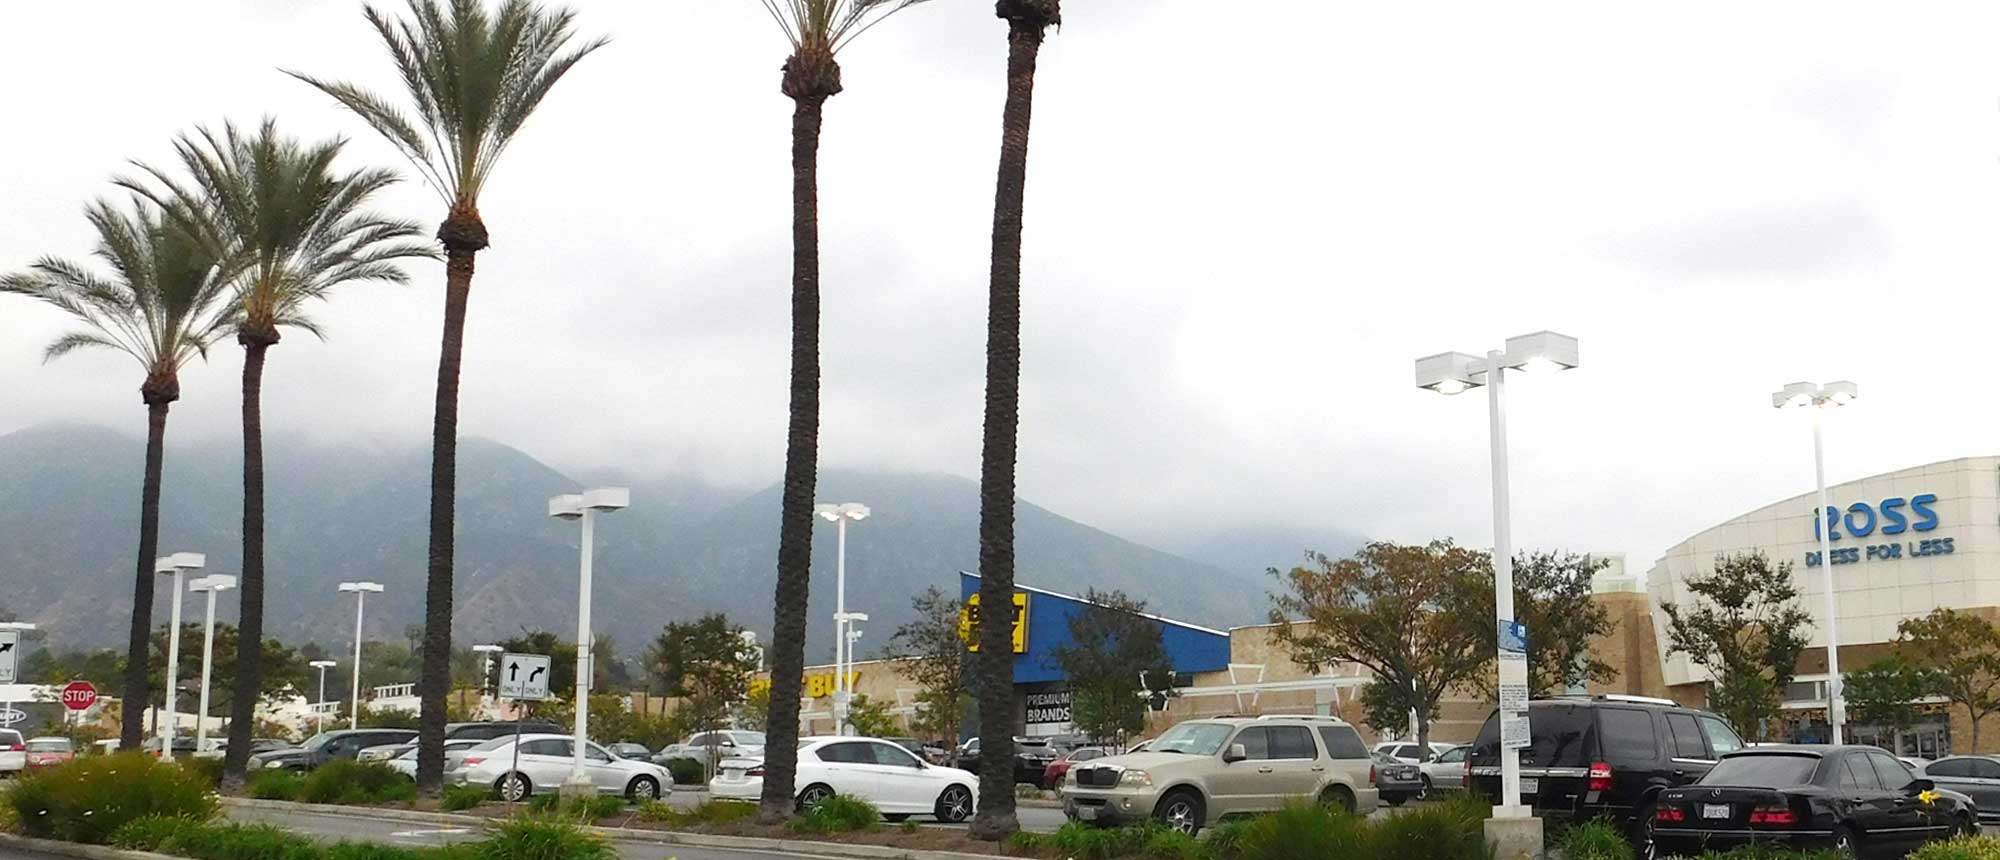 A shopping center on Foothill Blvd in East Pasadena